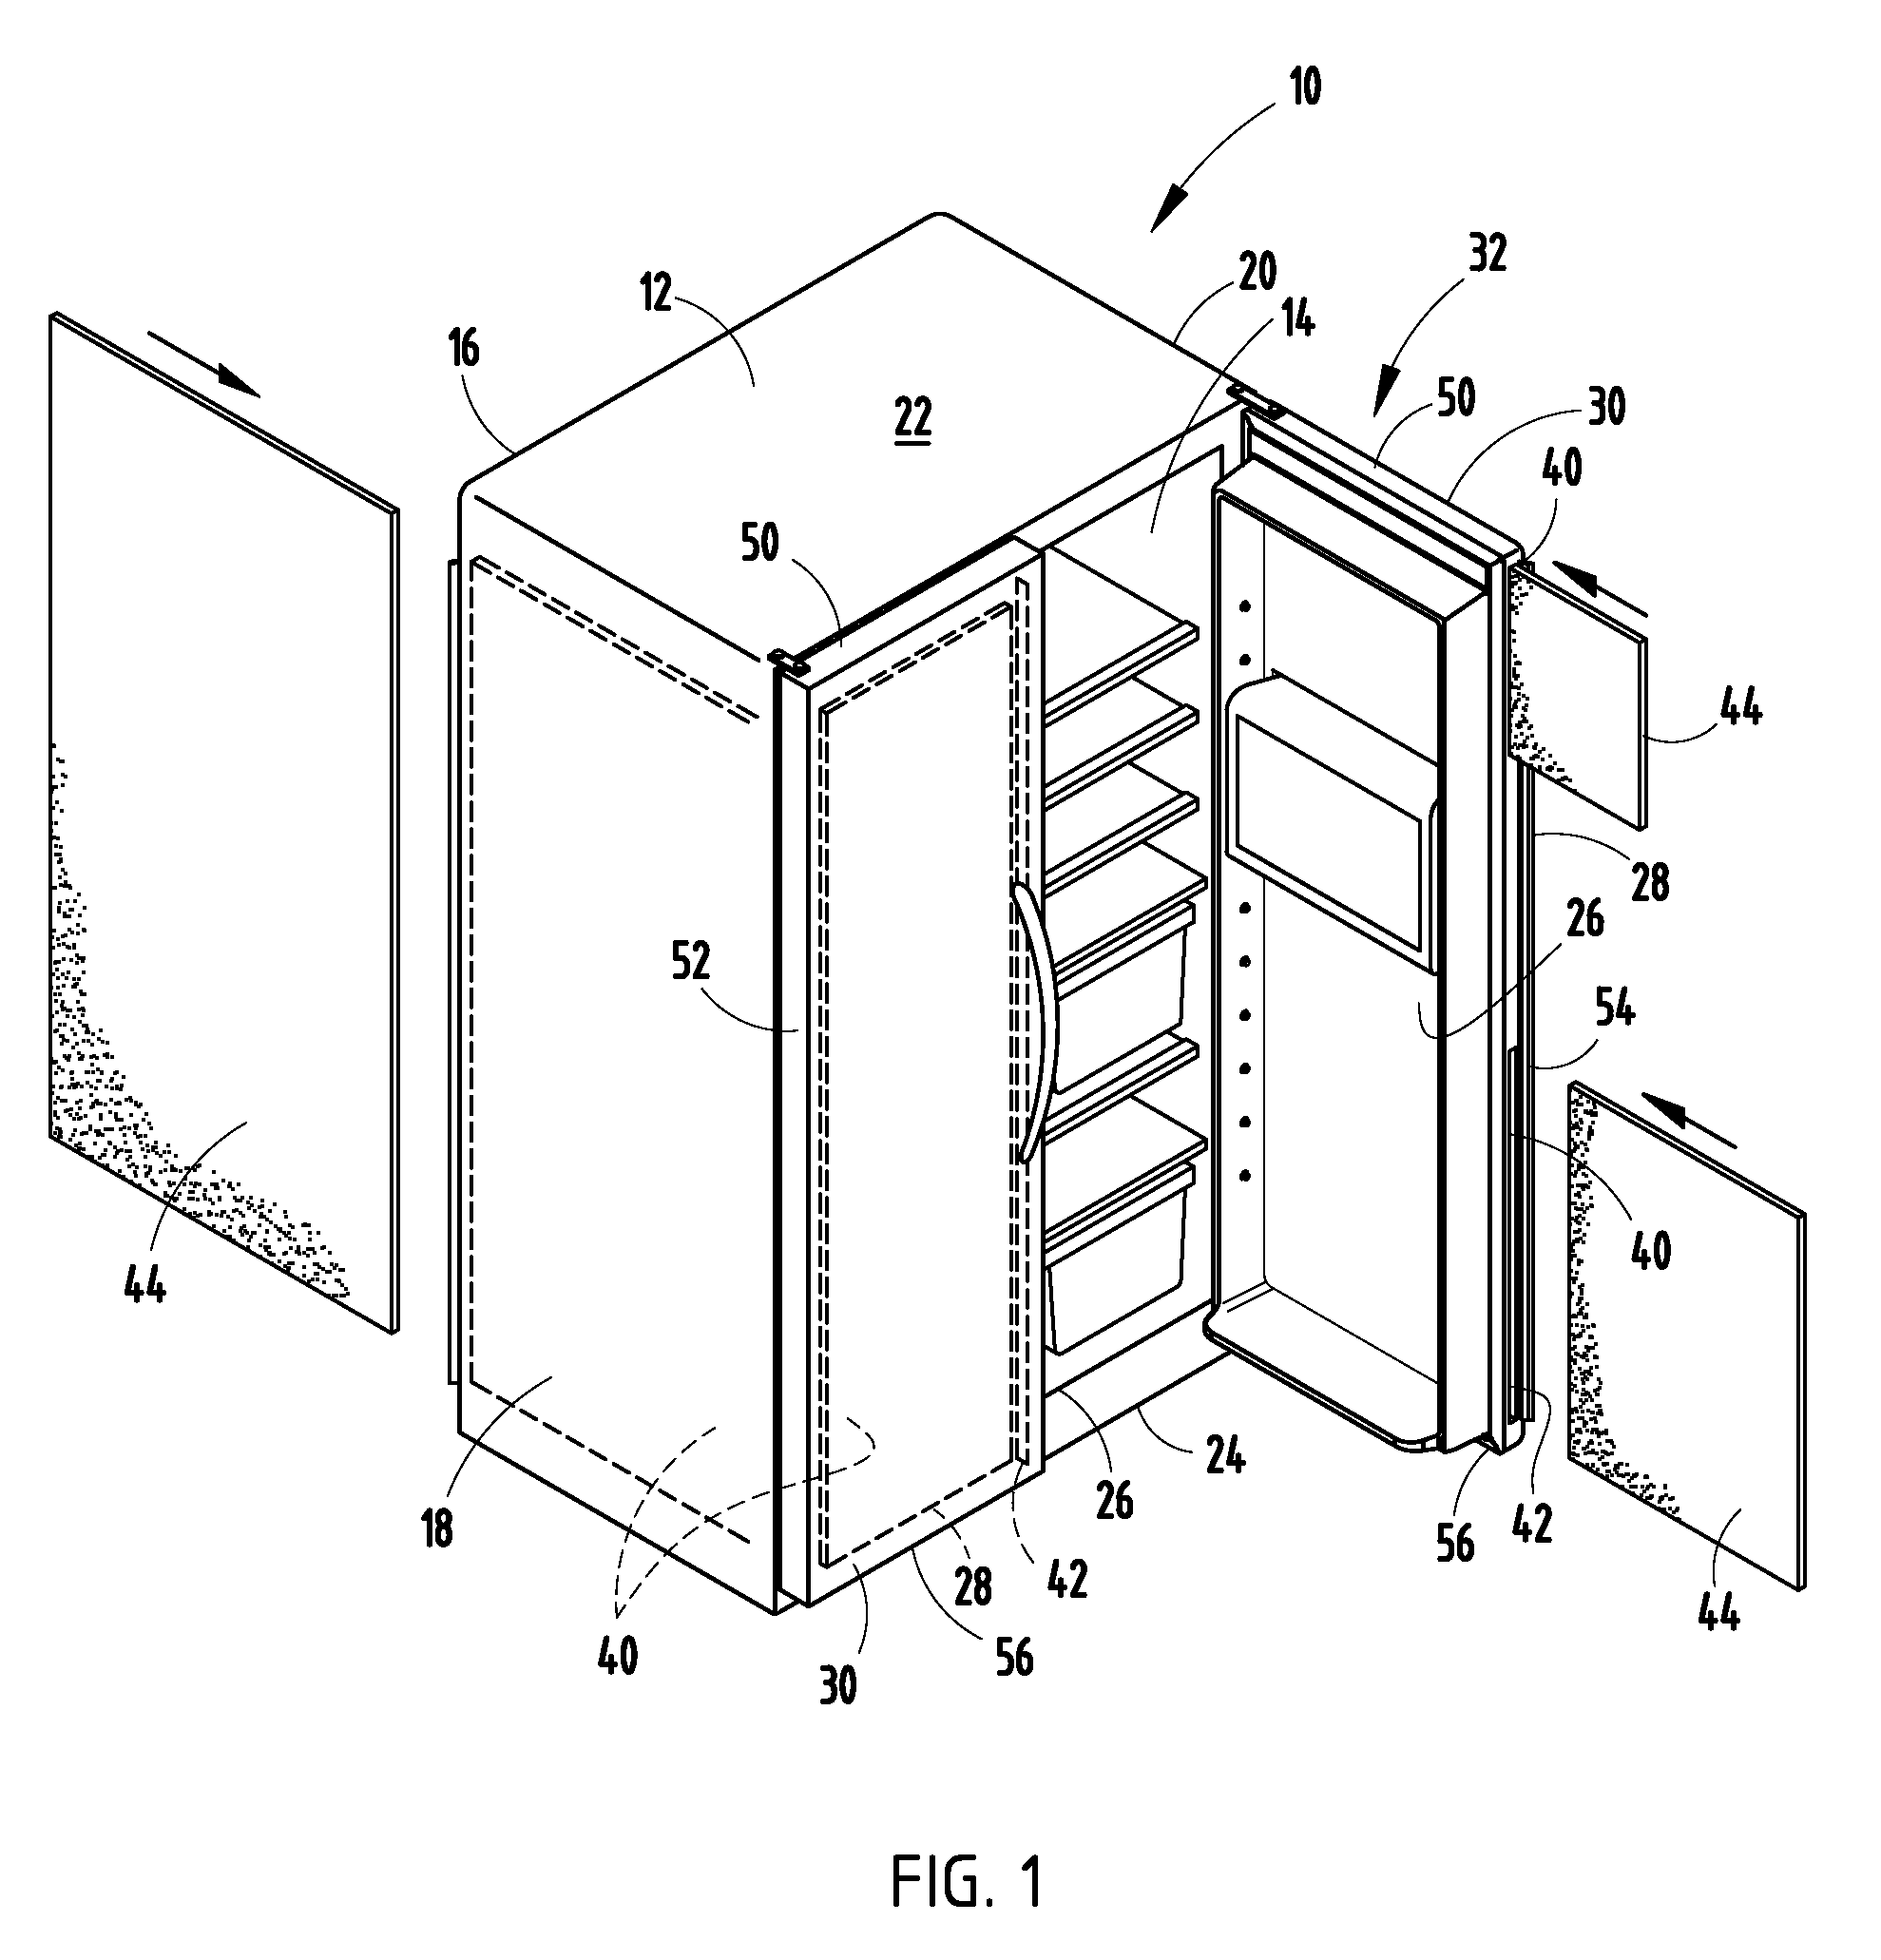 Insulation panels applied to or as a feature module